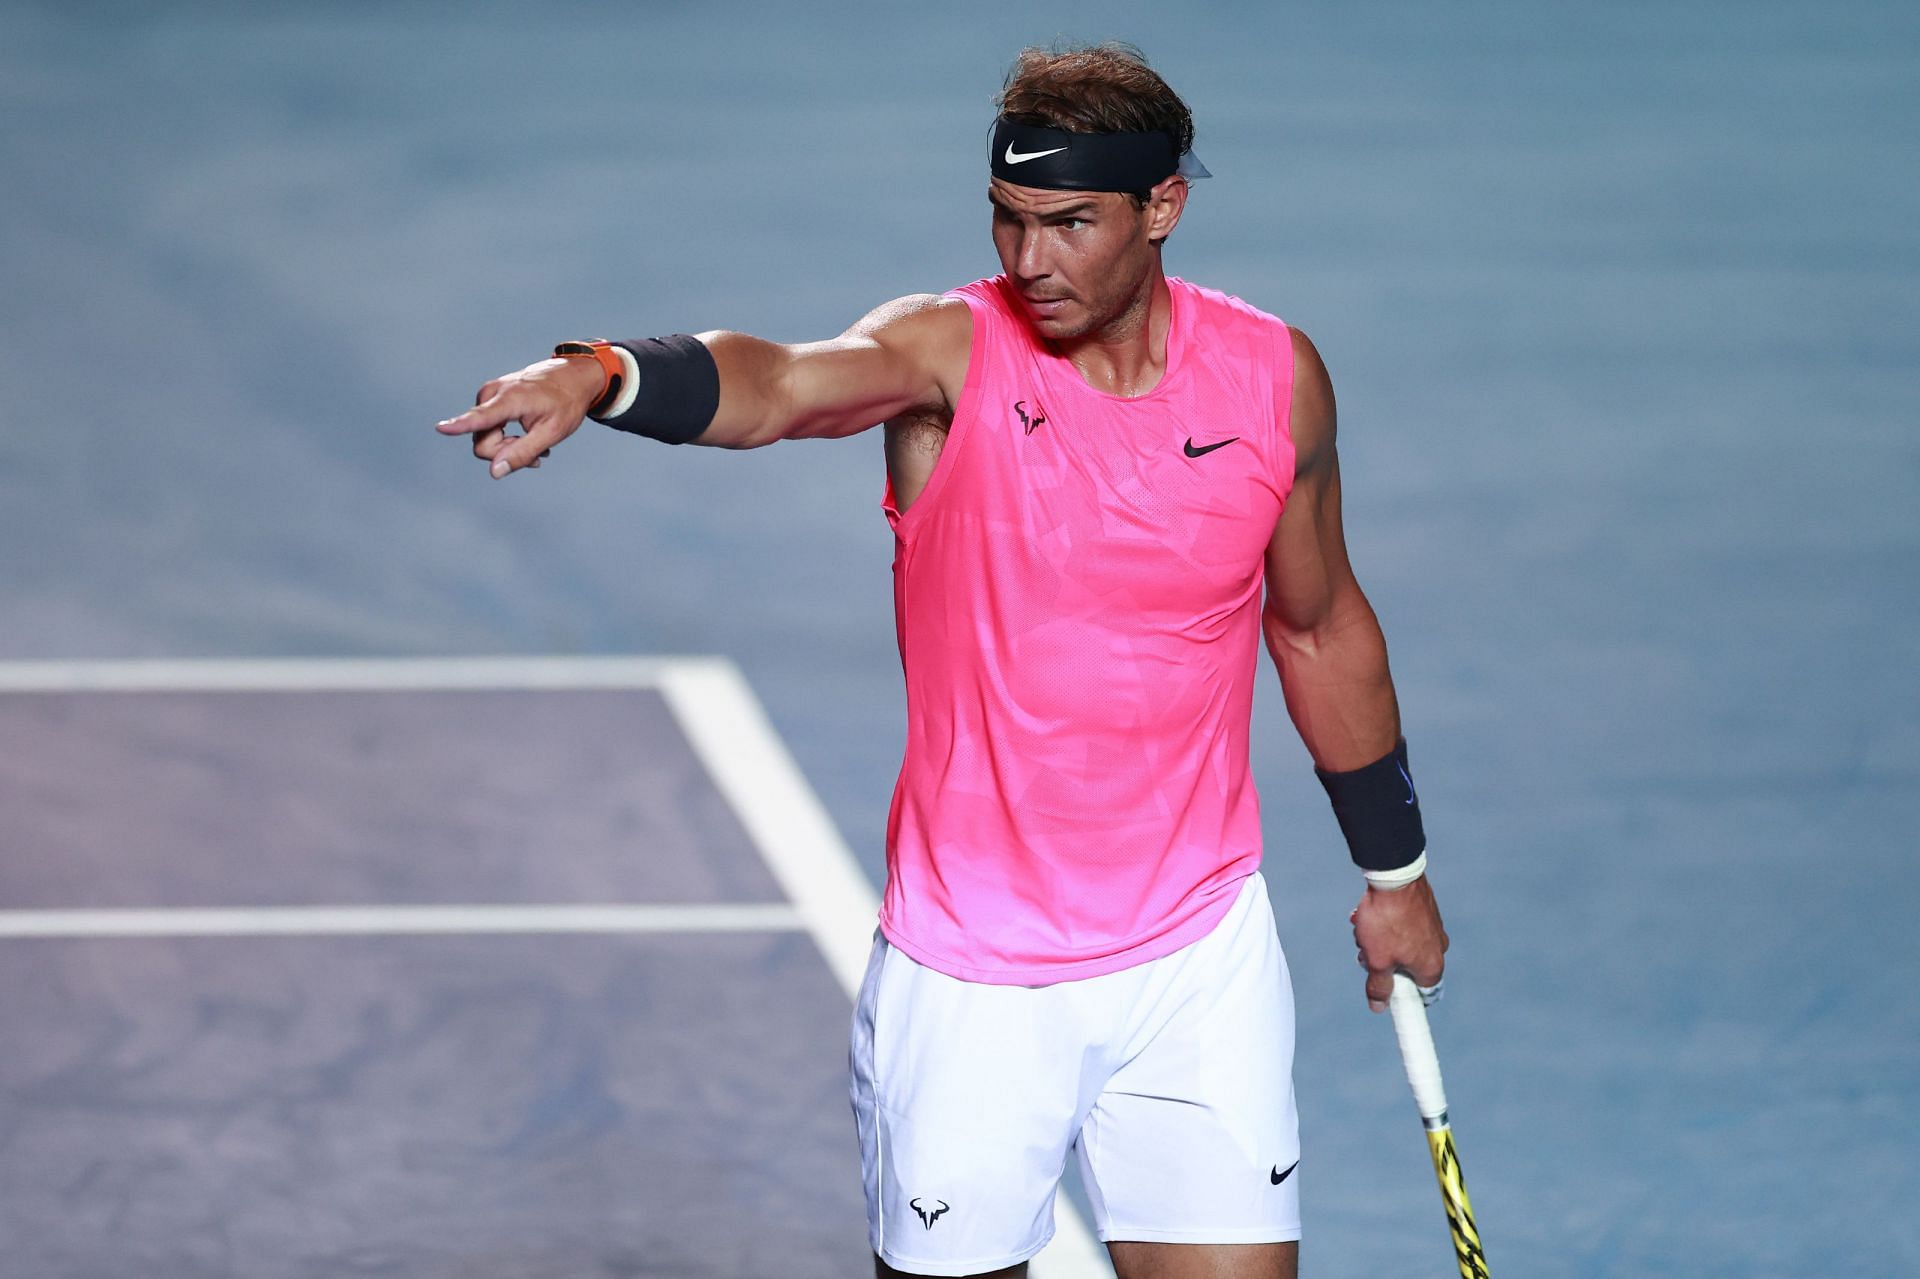 Rafael Nadal faces Reilly Opelka in the opening round of the 2022 Acapulco Open.